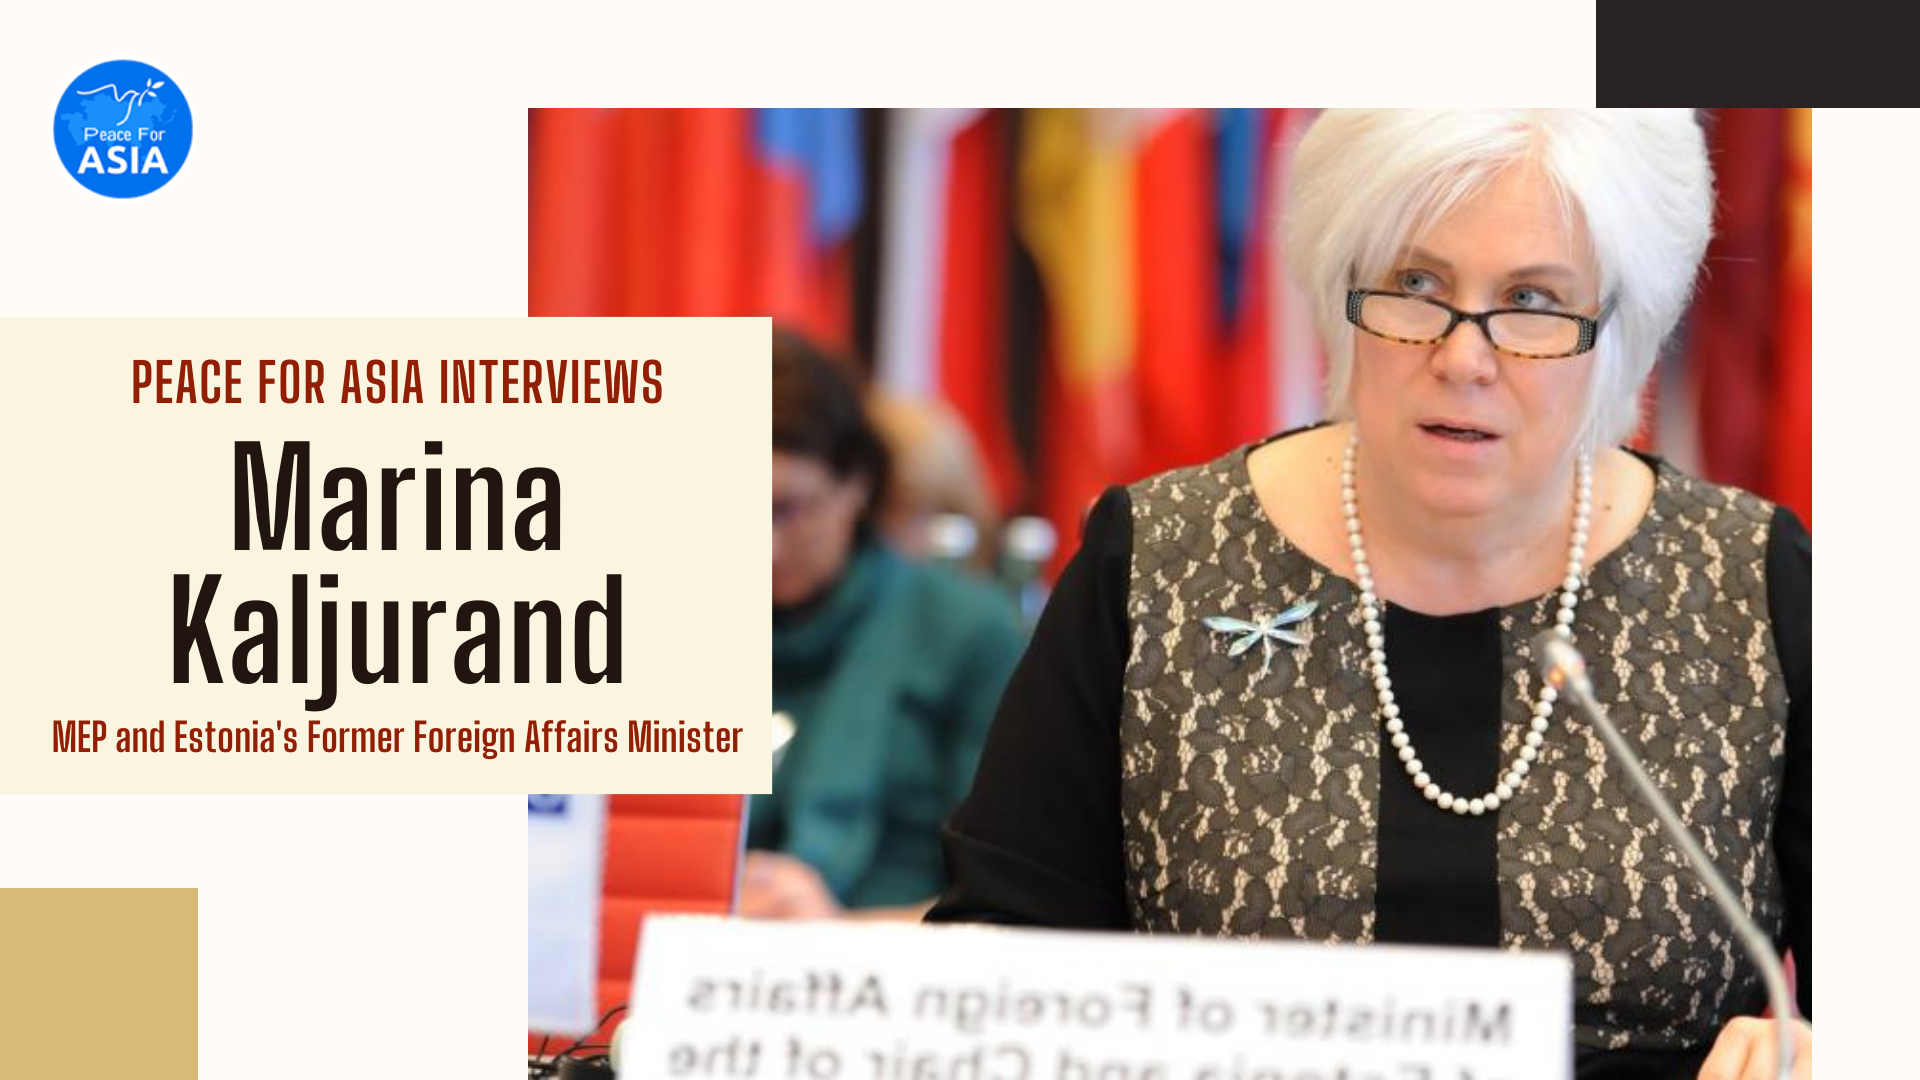 Peace for Asia Interviews Marina Kaljurand, MEP and Estonia’s Former Foreign Affairs Minister